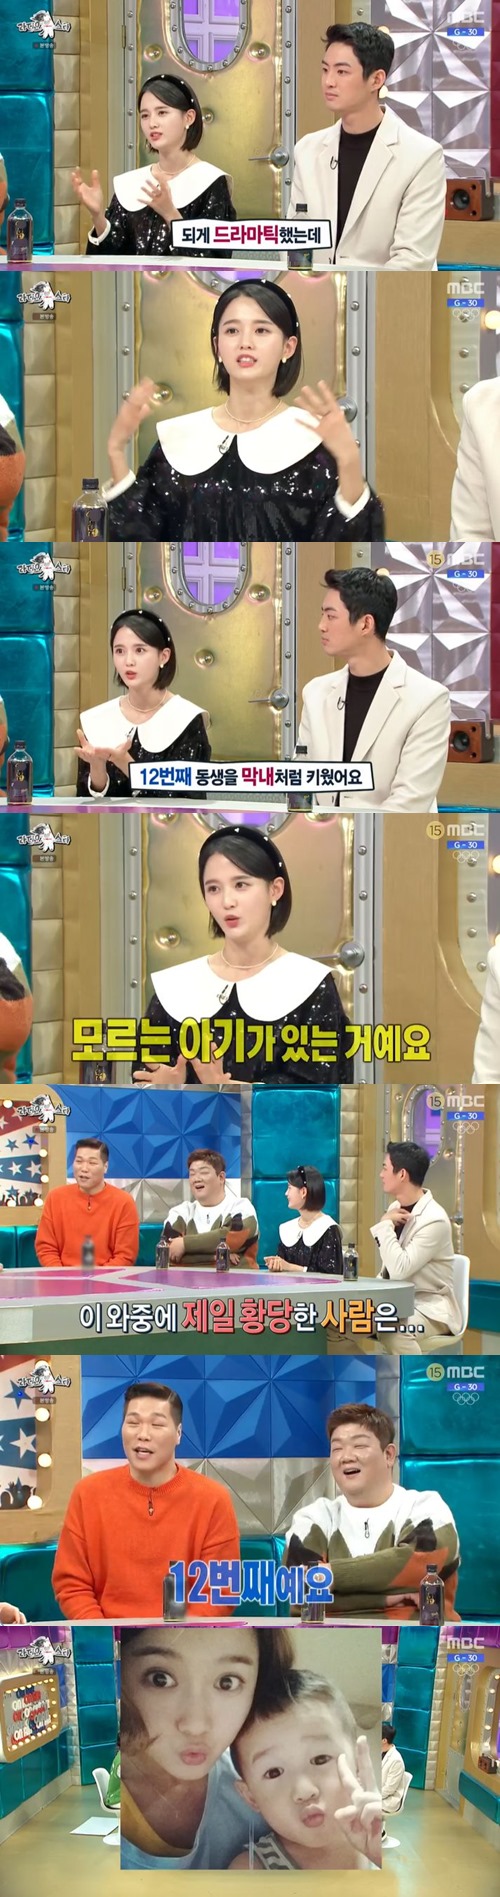 Radio Star Nam Bo-ra recalls the moment his youngest brother was bornIn the MBC entertainment program Radio Star (hereinafter referred to as Radio Star), which was broadcast on the afternoon of the 5th, Seo Jang-hoon, Yoo Min-sang, Nam Bo-ra and Koo Ja-wook appeared and performed a pleasant gesture.On the same day, Ahn asked his eldest daughter, Nam Bo-ra, I wonder what she felt when her youngest child was born.It was dramatic at the moment when my youngest was born, I didnt know there was a youngest, I was in my stomach, Nam Bo-ra said. I raised my 12th brother like the youngest.I did the most expensive thing, the best thing, and I was the last brother, so I did my best to care. But one day I went home and I didnt know a baby. I was in college and I went to school. I was confused.Do I have to raise it again? I hated it at first. I hardly looked after it. My mother told me to raise it. But she was a no-show.